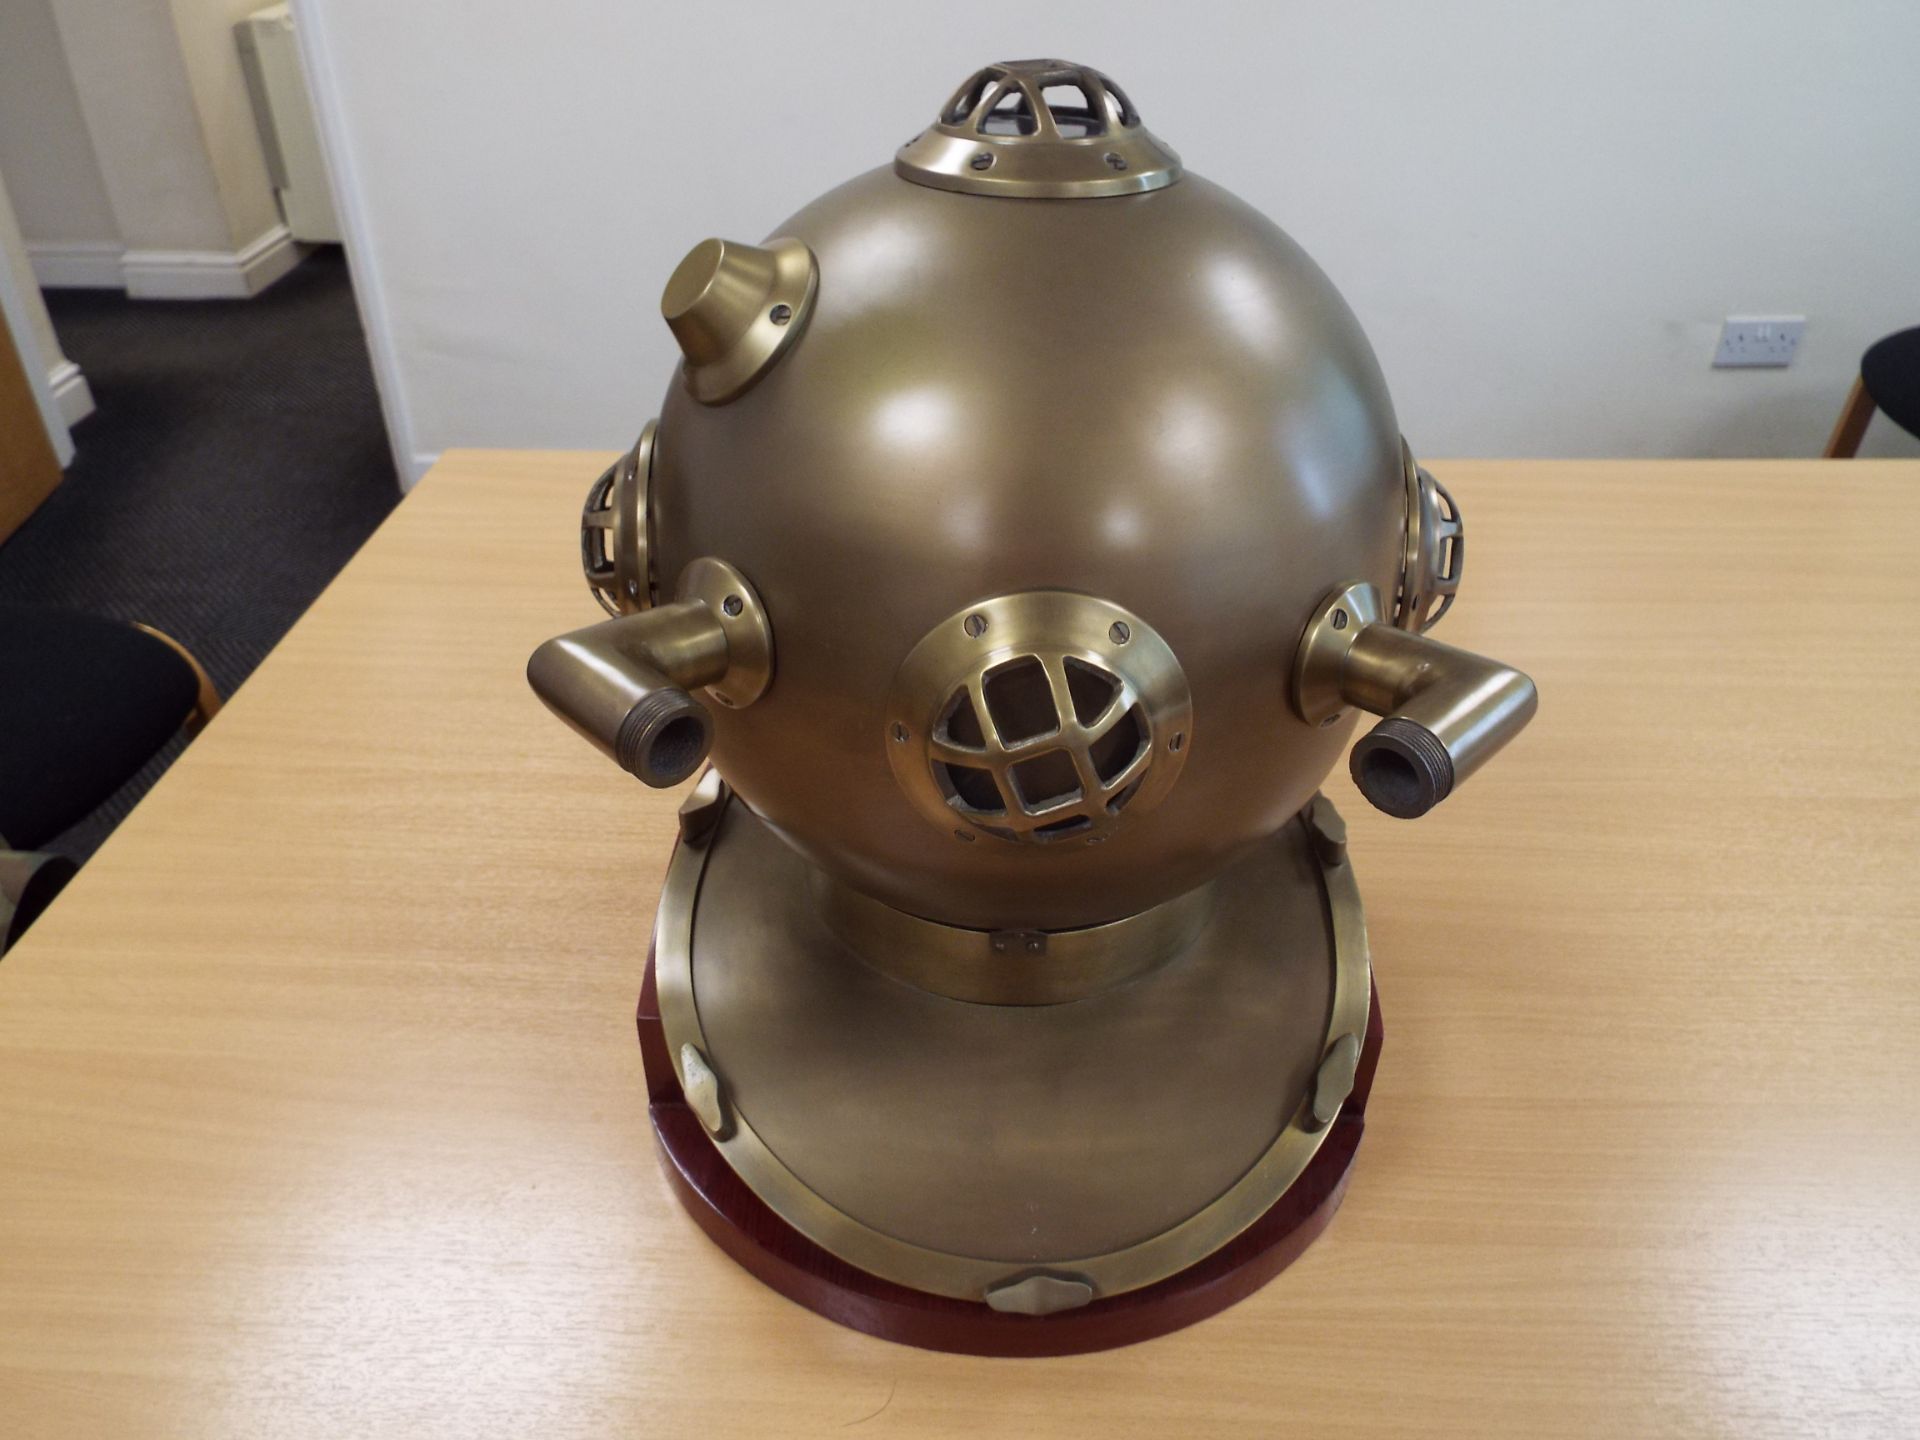 Replica Full Size U.S. Navy Mark V Brass Diving Helmet on Wooden Display Stand - Image 4 of 9